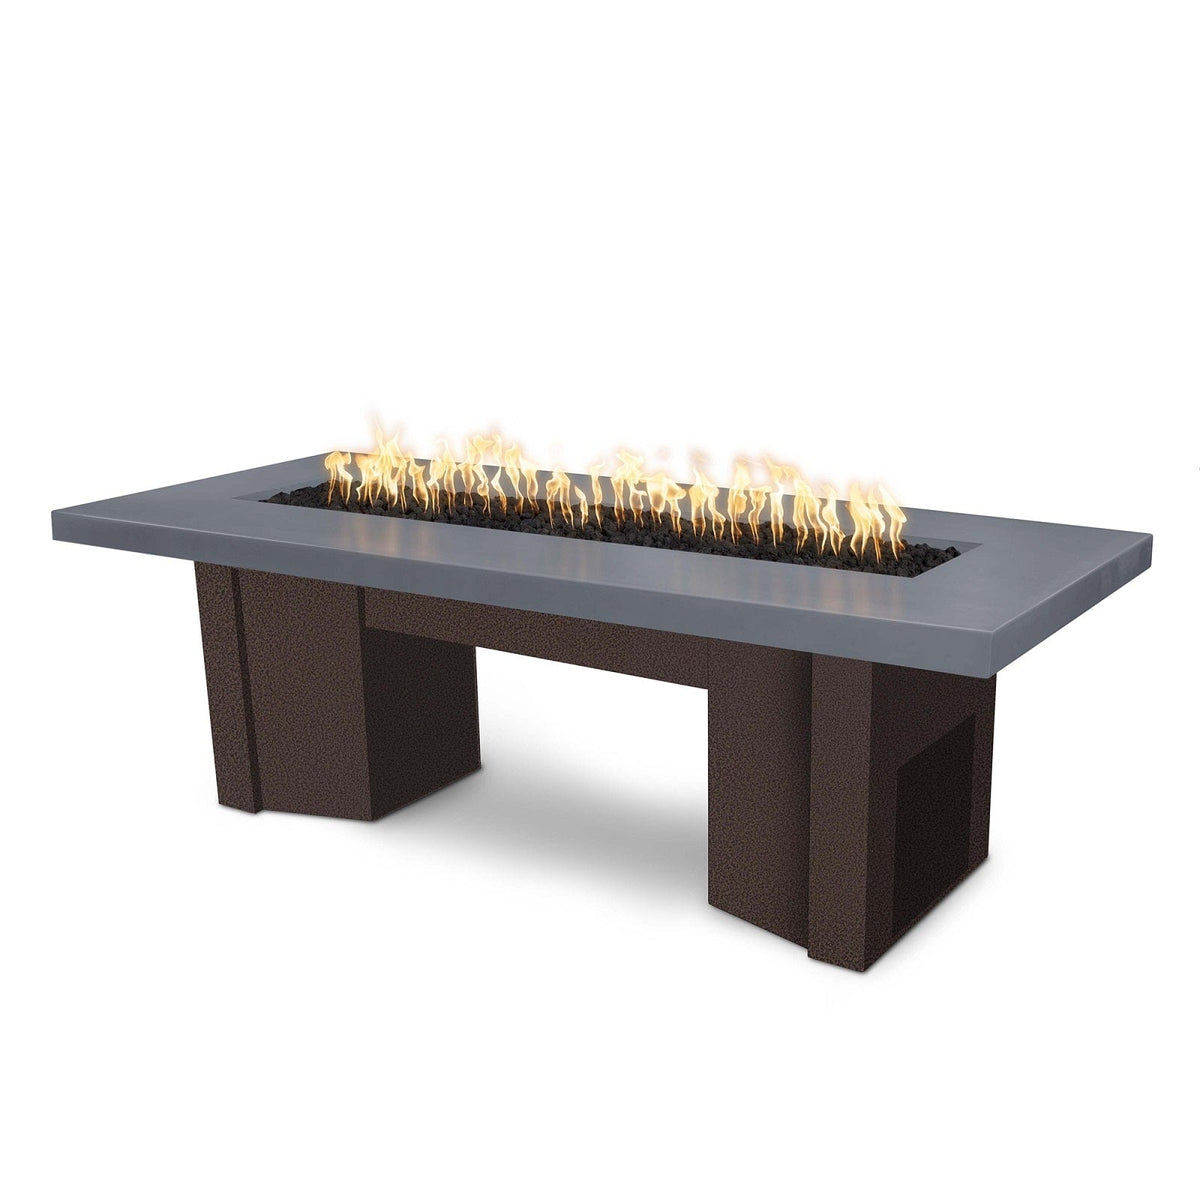 The Outdoor Plus Fire Features Gray (-GRY) / Copper Vein Powder Coated Steel (-CPV) The Outdoor Plus 60&quot; Alameda Fire Table Smooth Concrete in Natural Gas - Match Lit / OPT-ALMGFRC60-NG